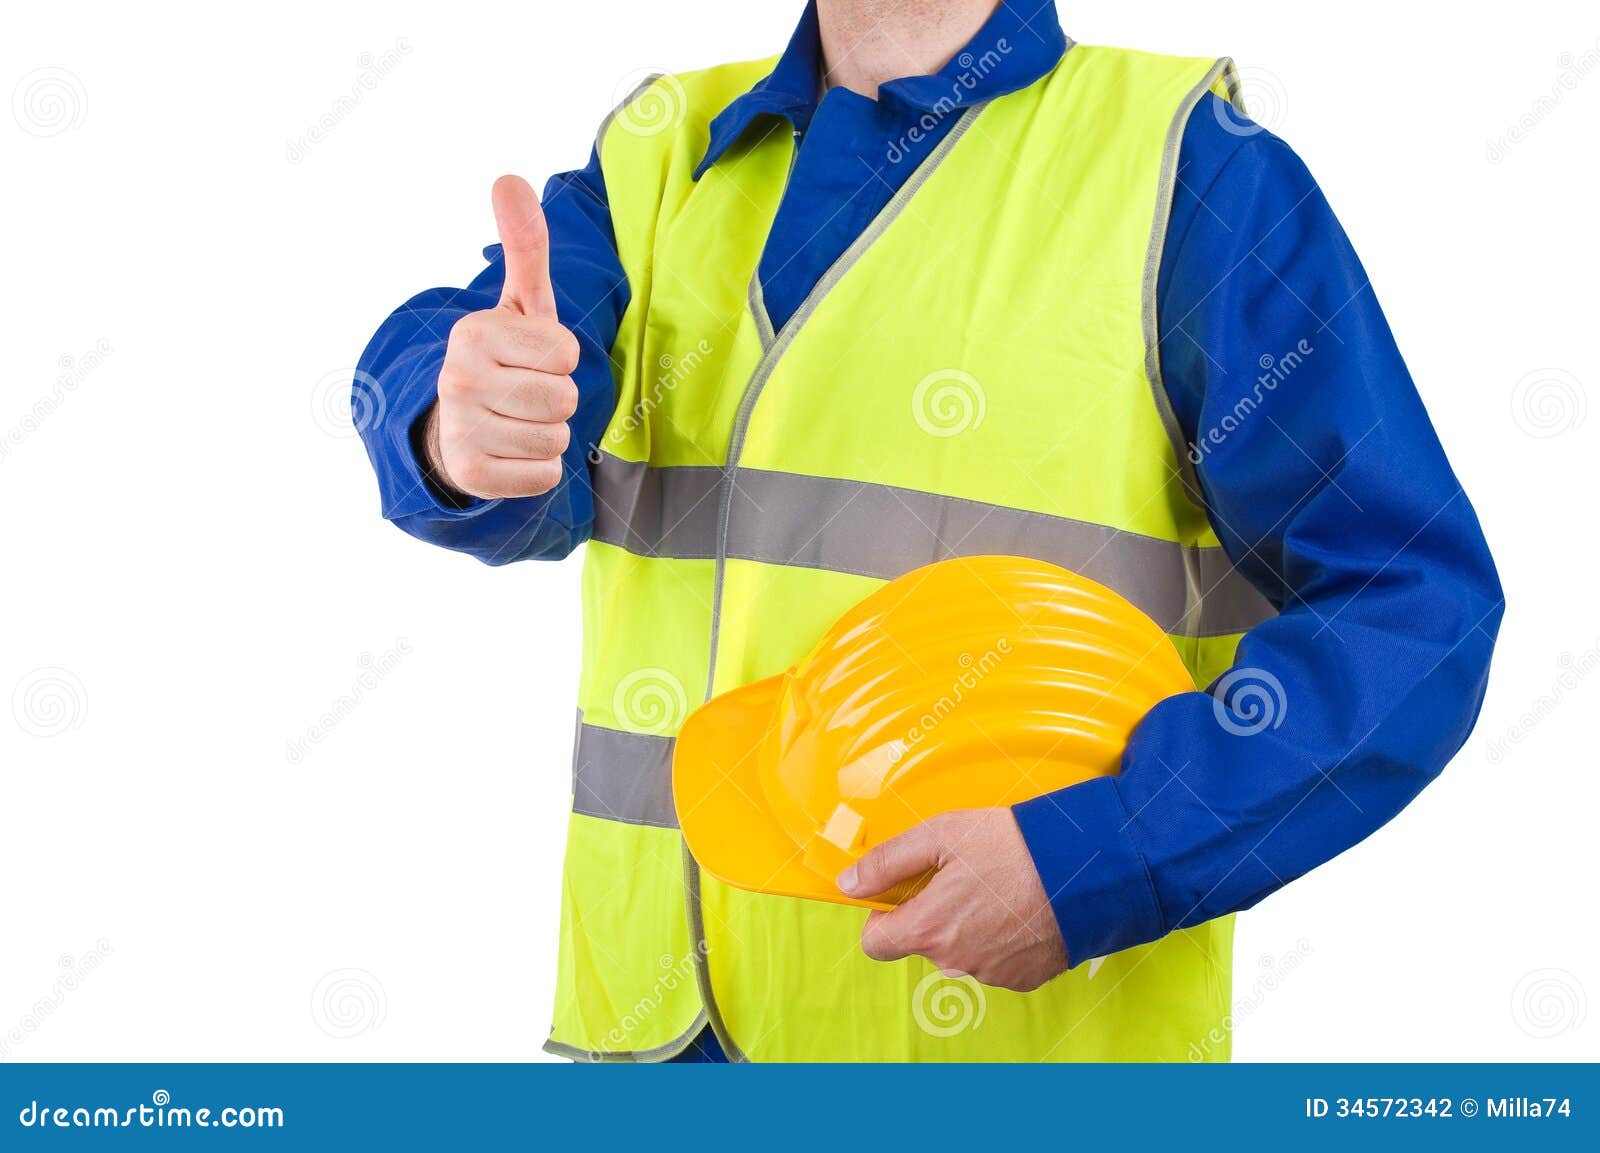 Blue collar worker. stock photo. Image of adult, labor - 34572342